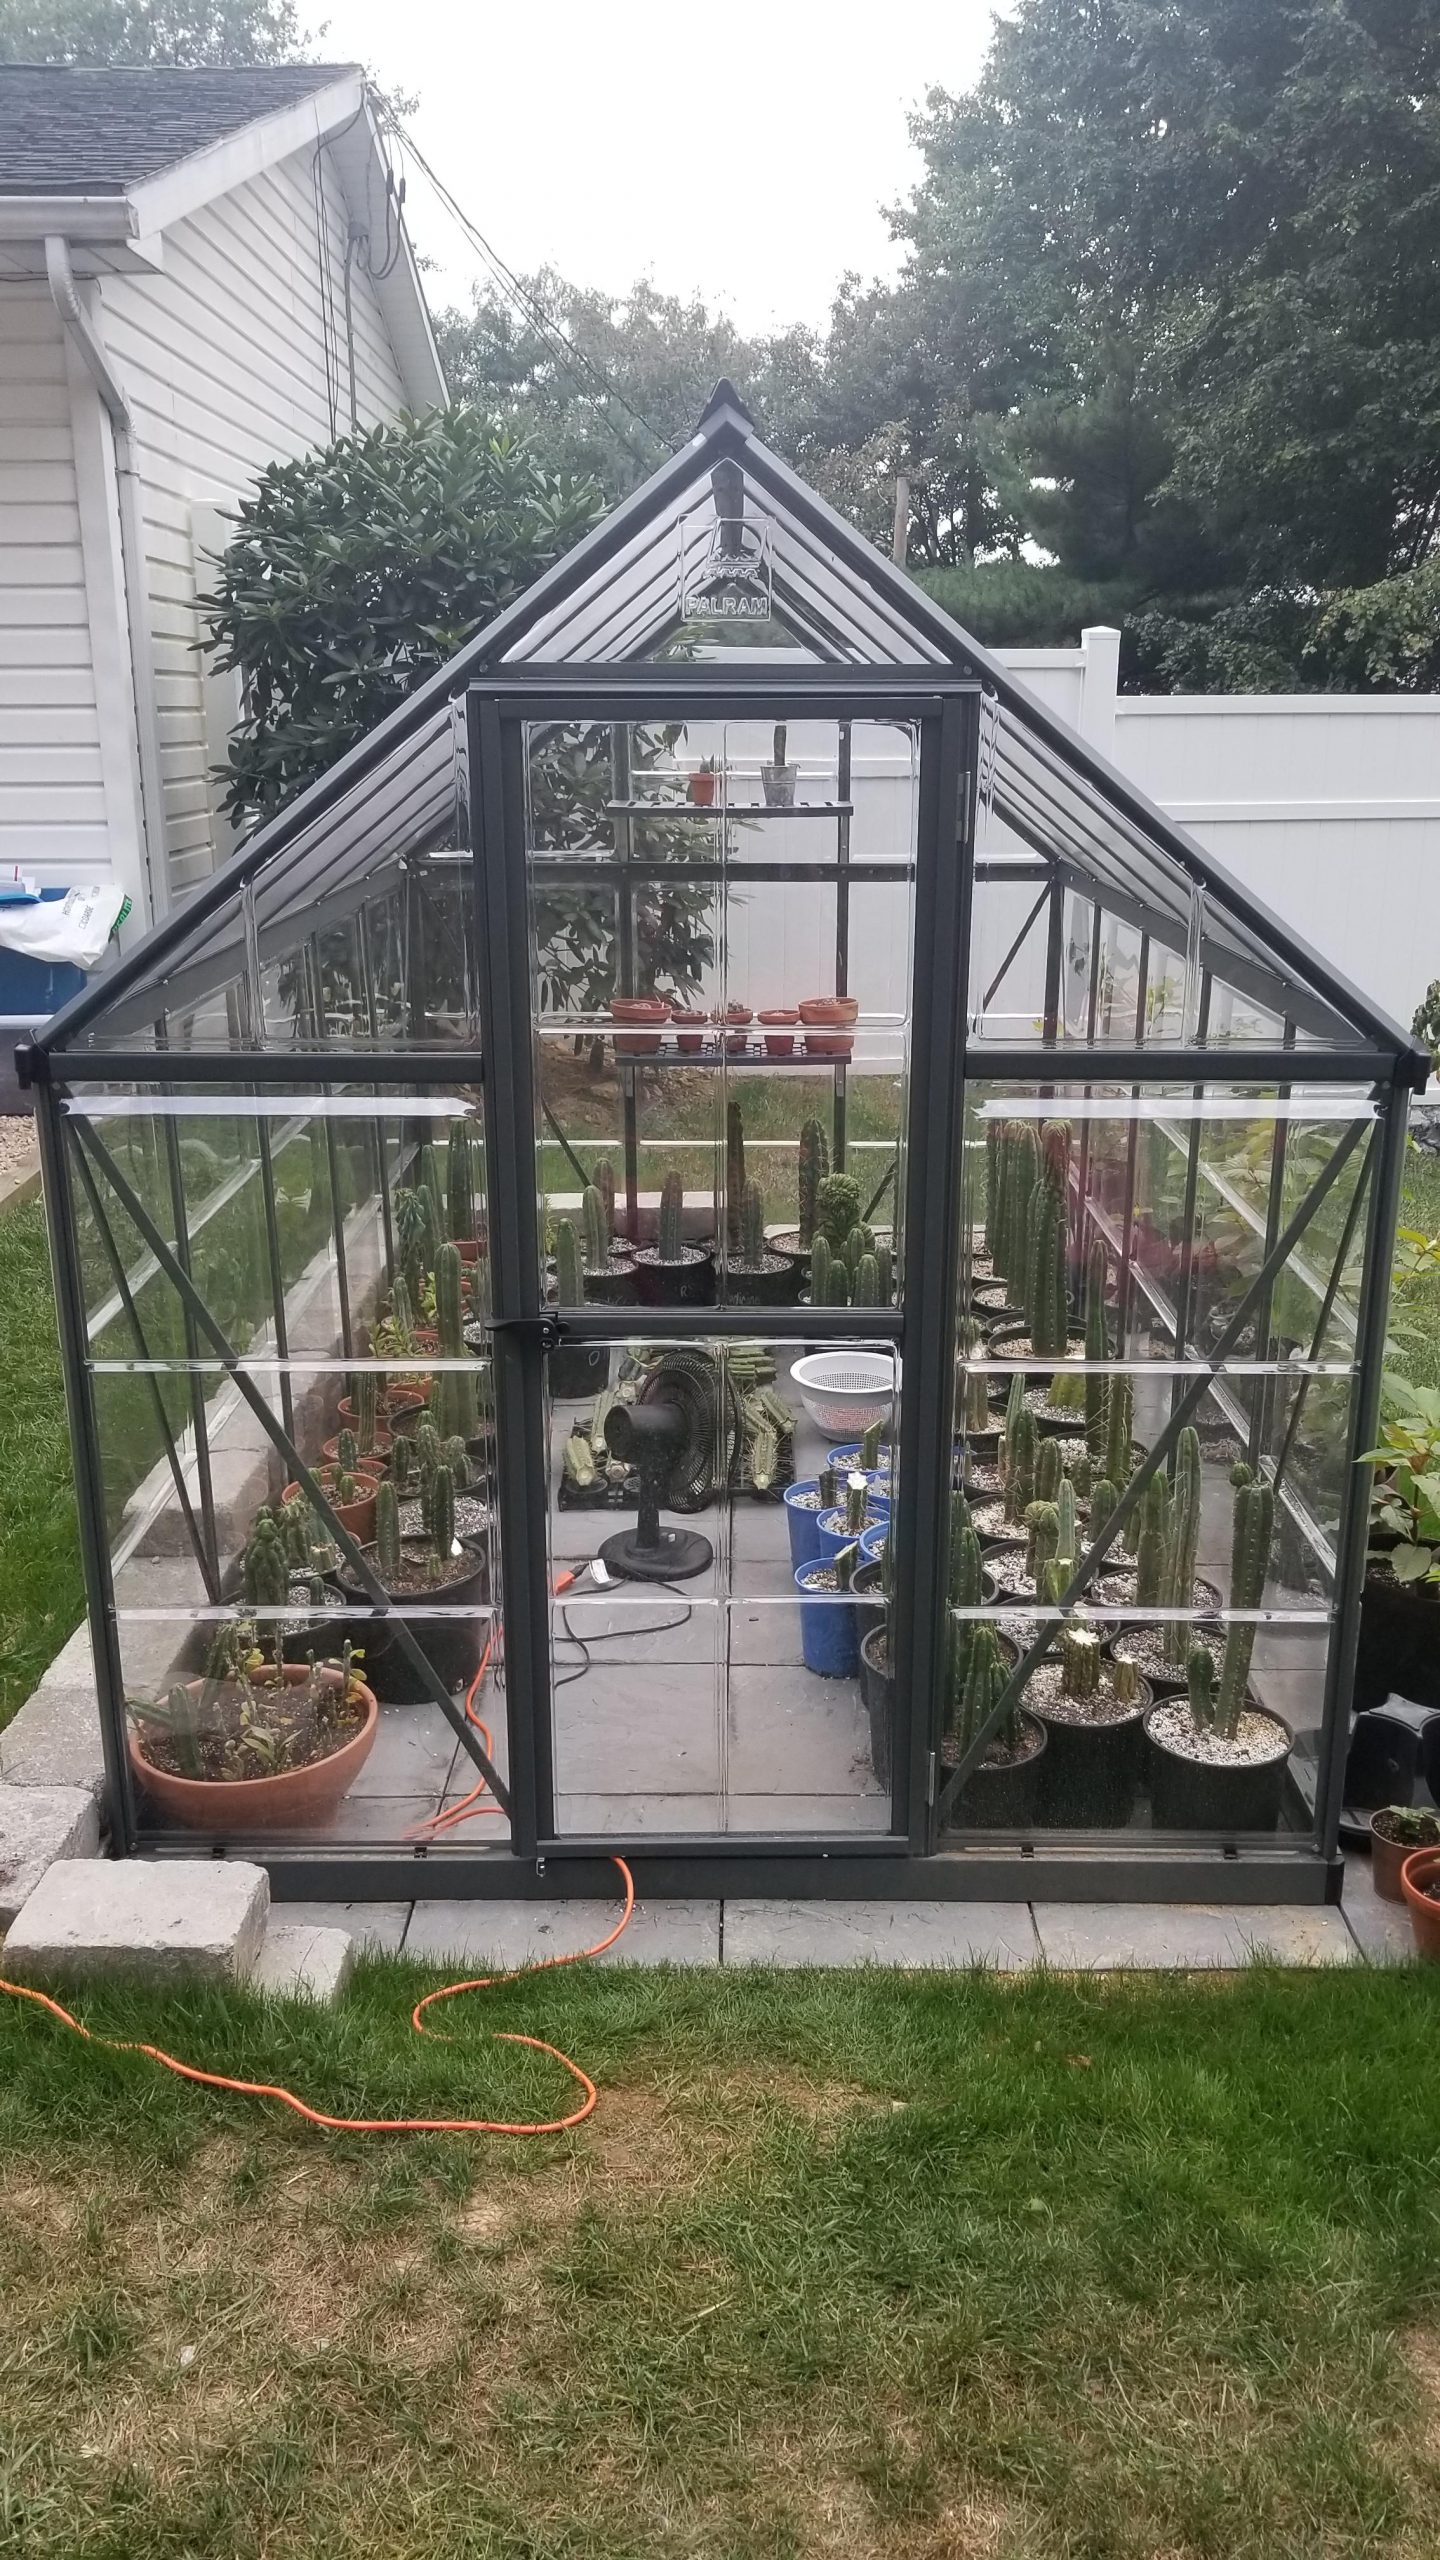 An In-Depth Review of the Palram Hybrid Greenhouse